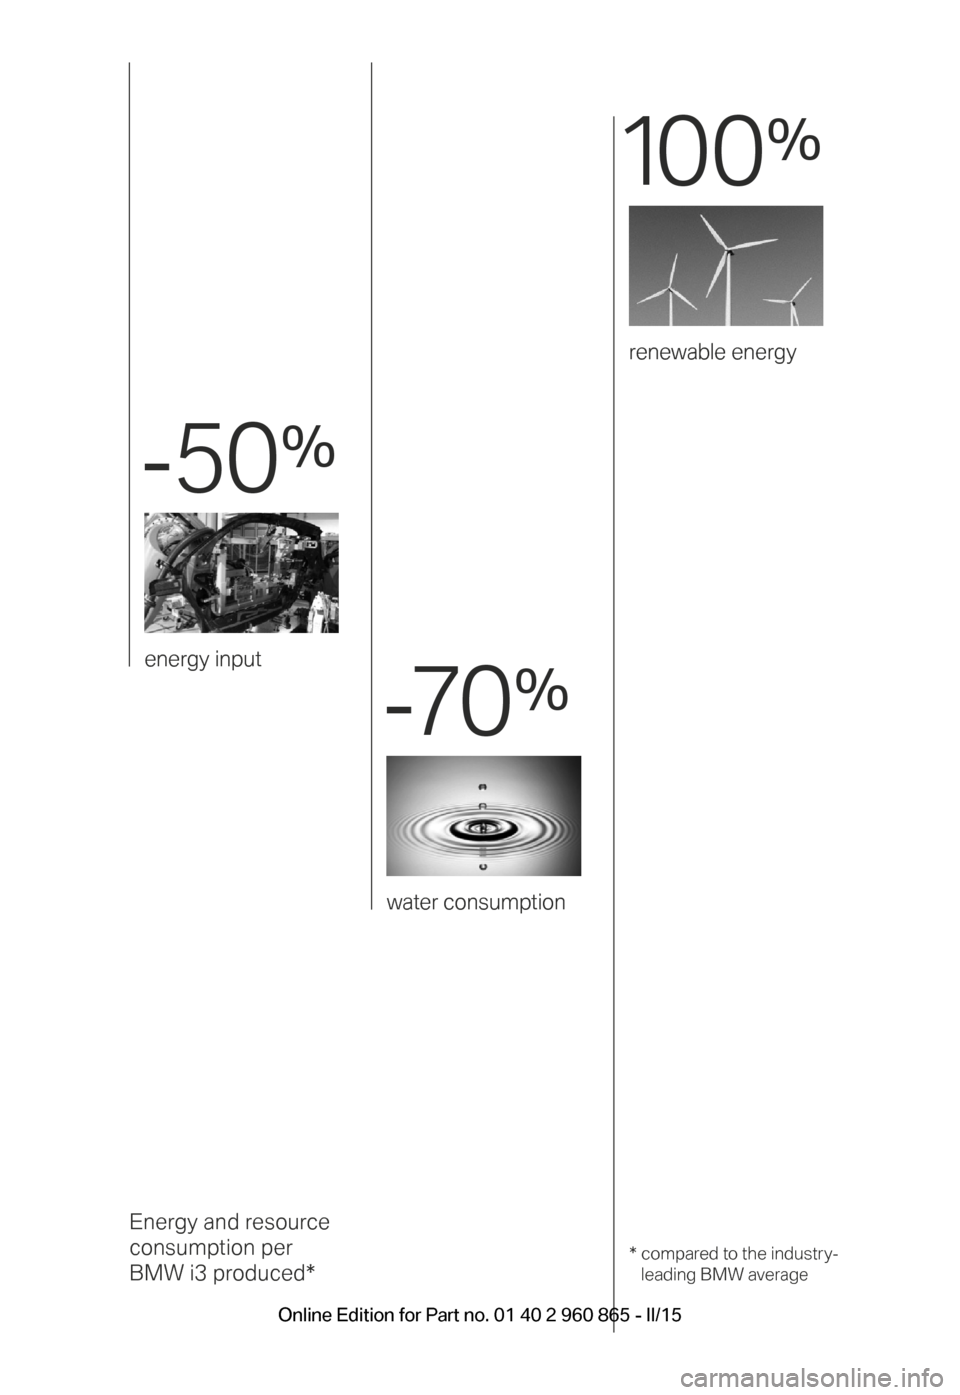 BMW I3 2015 I01 Owners Manual Energy and resource  
consumption per 
BMW i3 produced** compared to the industr y-leading BMW average
renewable energy
energy input
water consumption
10 0
%
 
 - 5 0
%
 
 - 7 0
%
 
BMW_i3_Bedienungse